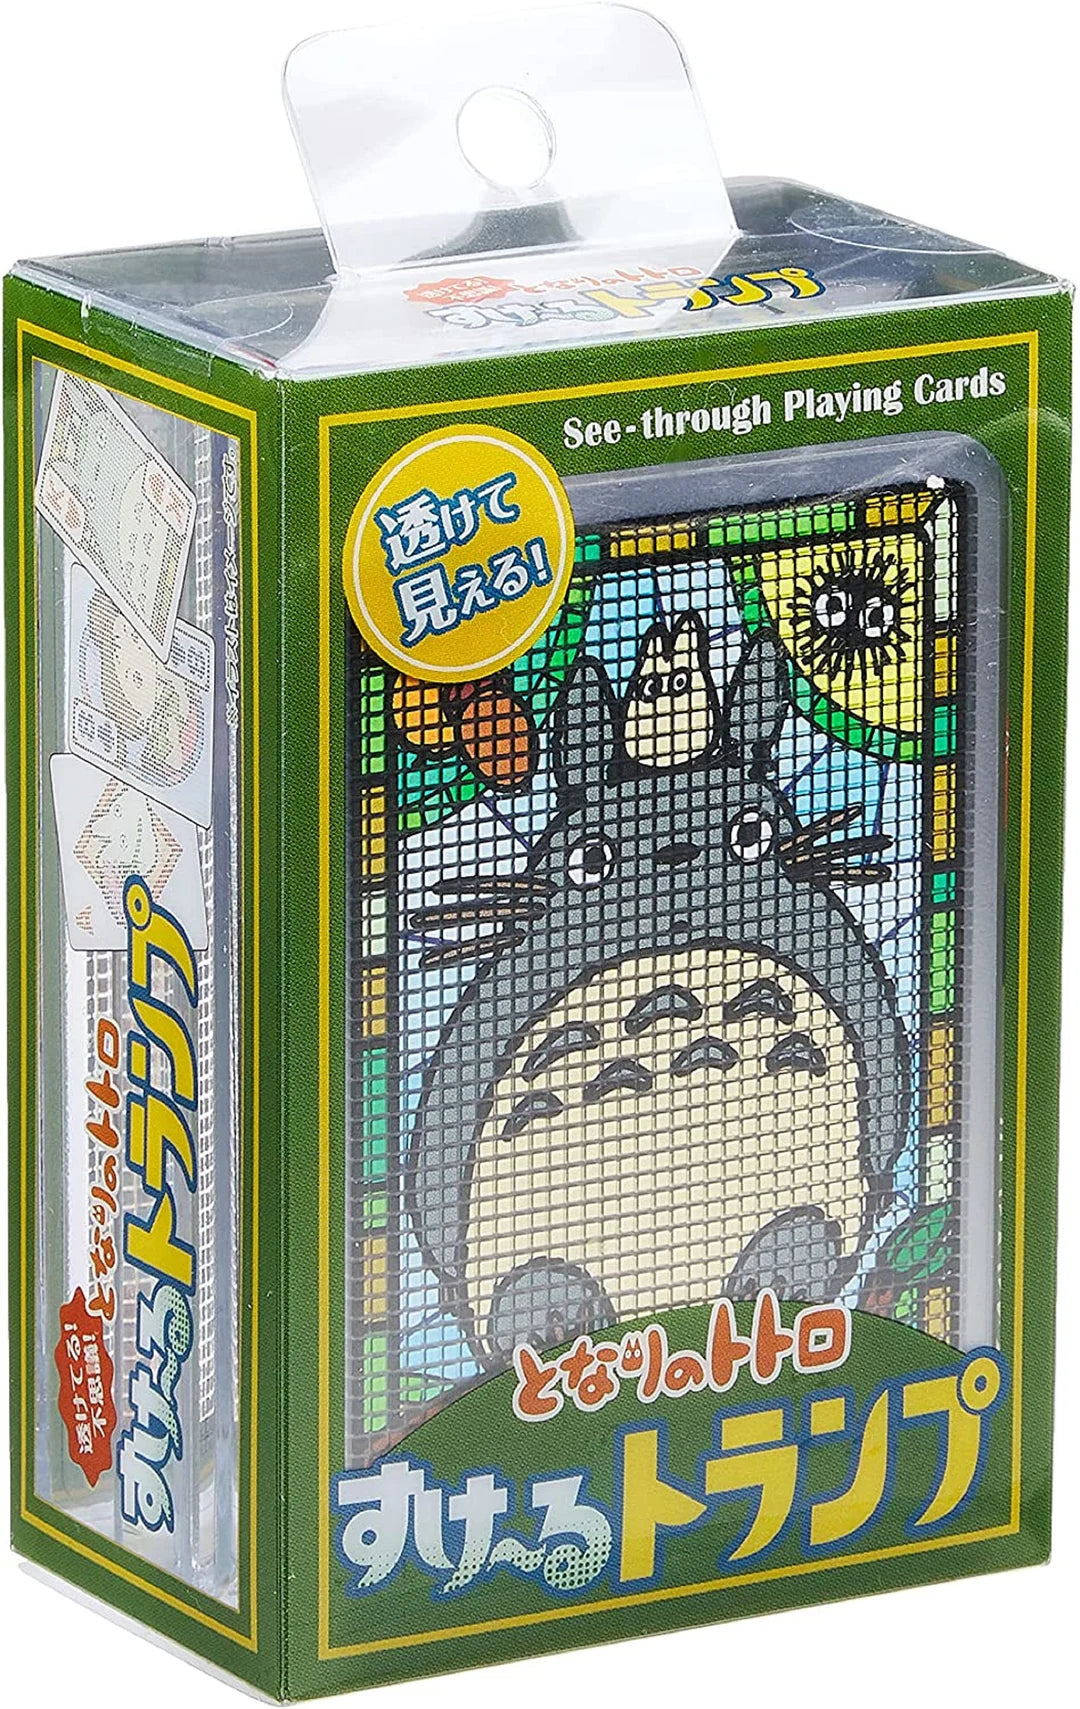 Transparent Totoro Playing Cards